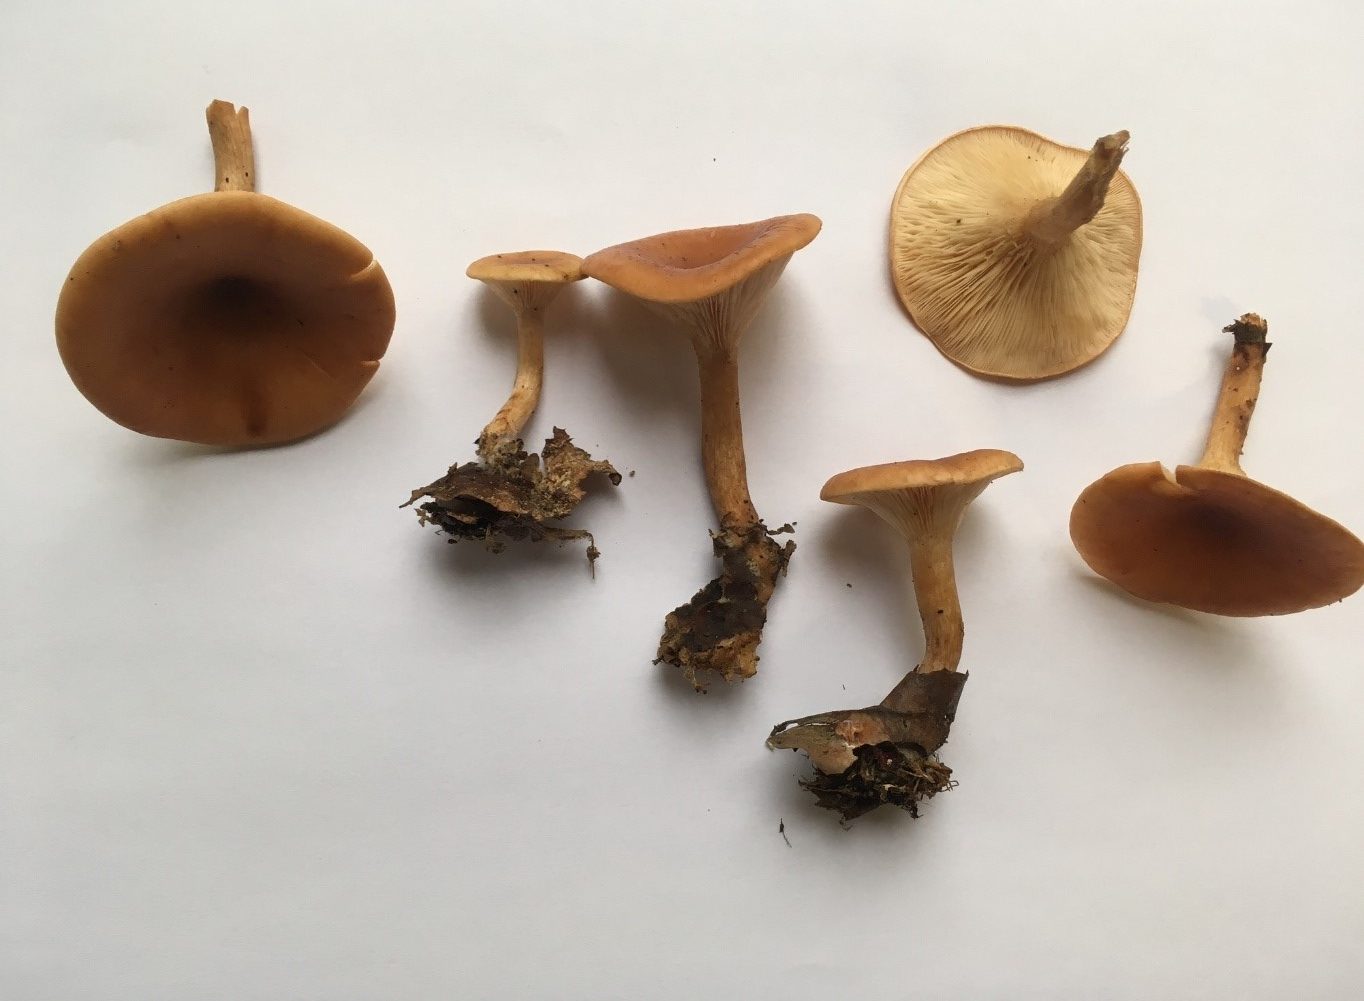 A Mushroom to the Rescue of Patients with Rare Genetic Diseases